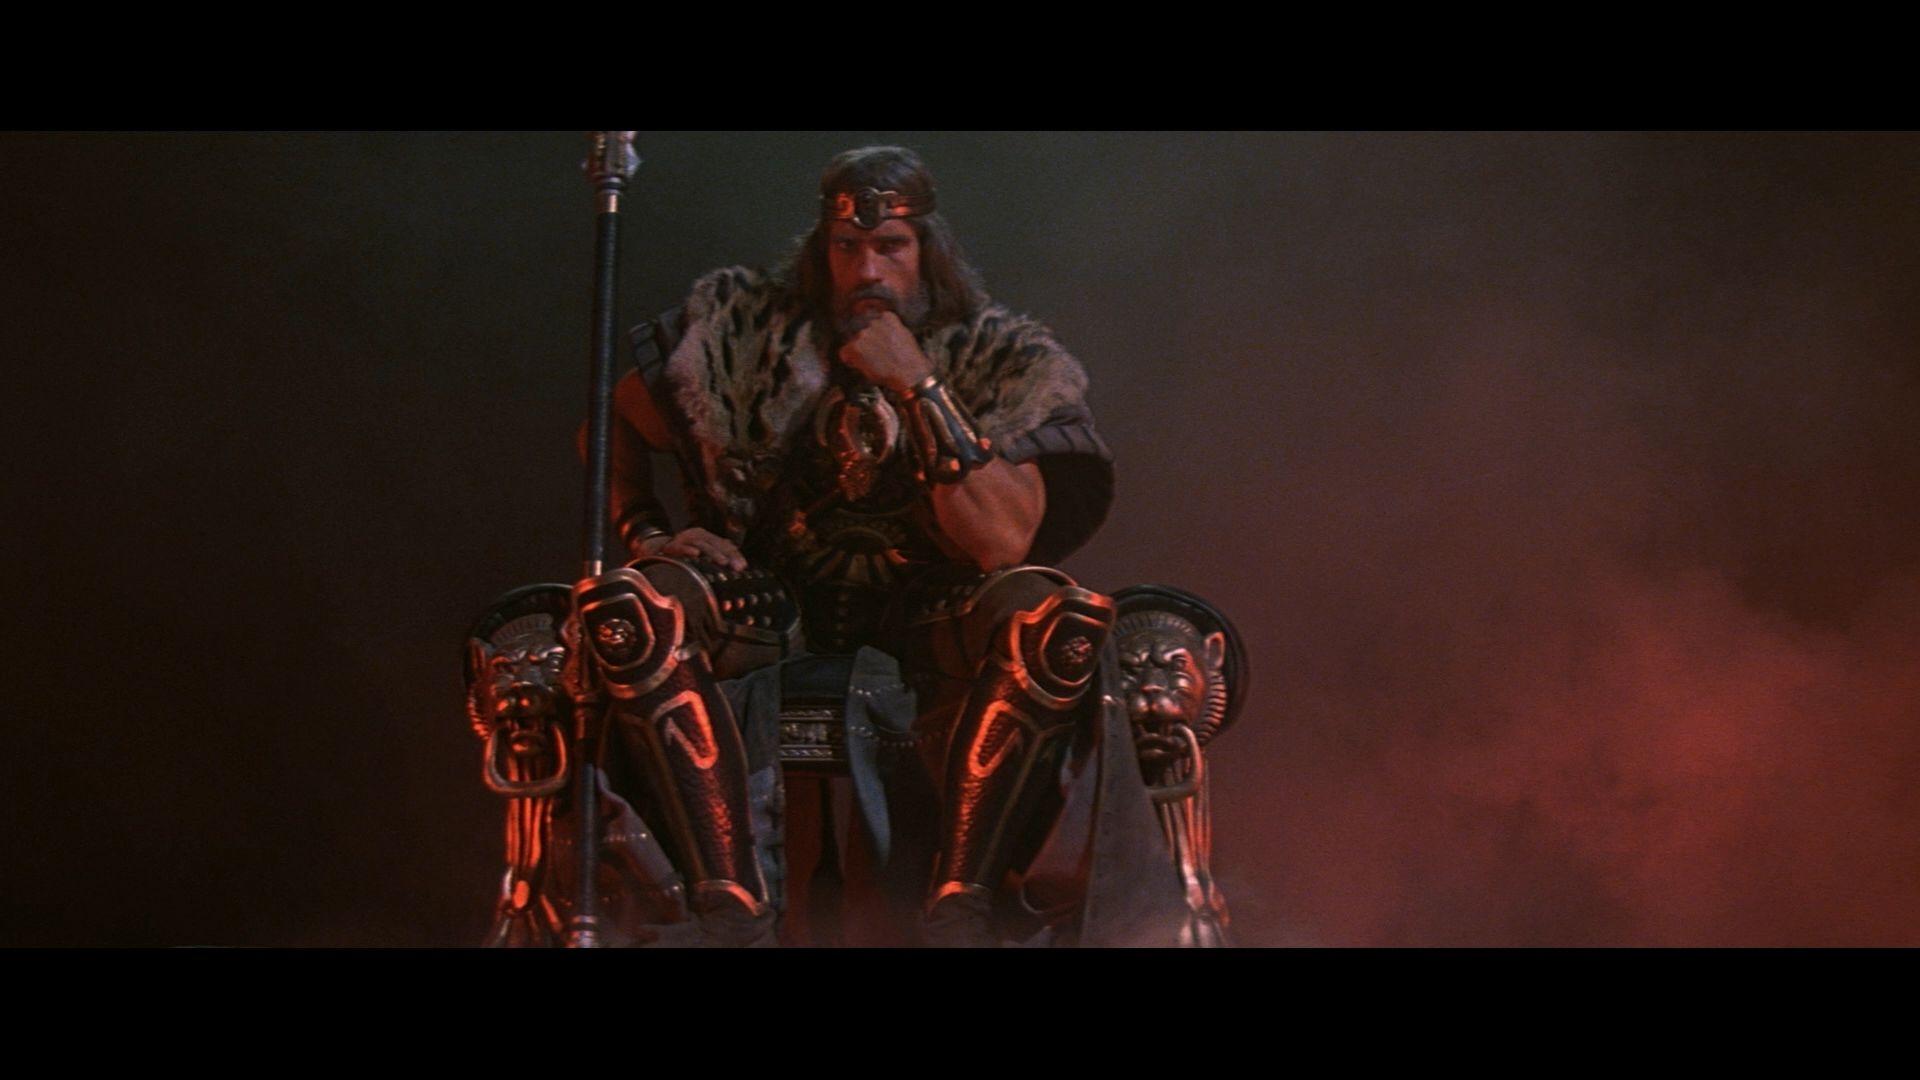 Movie Conan The Barbarian Wallpapers 1600x1062 px Free Download